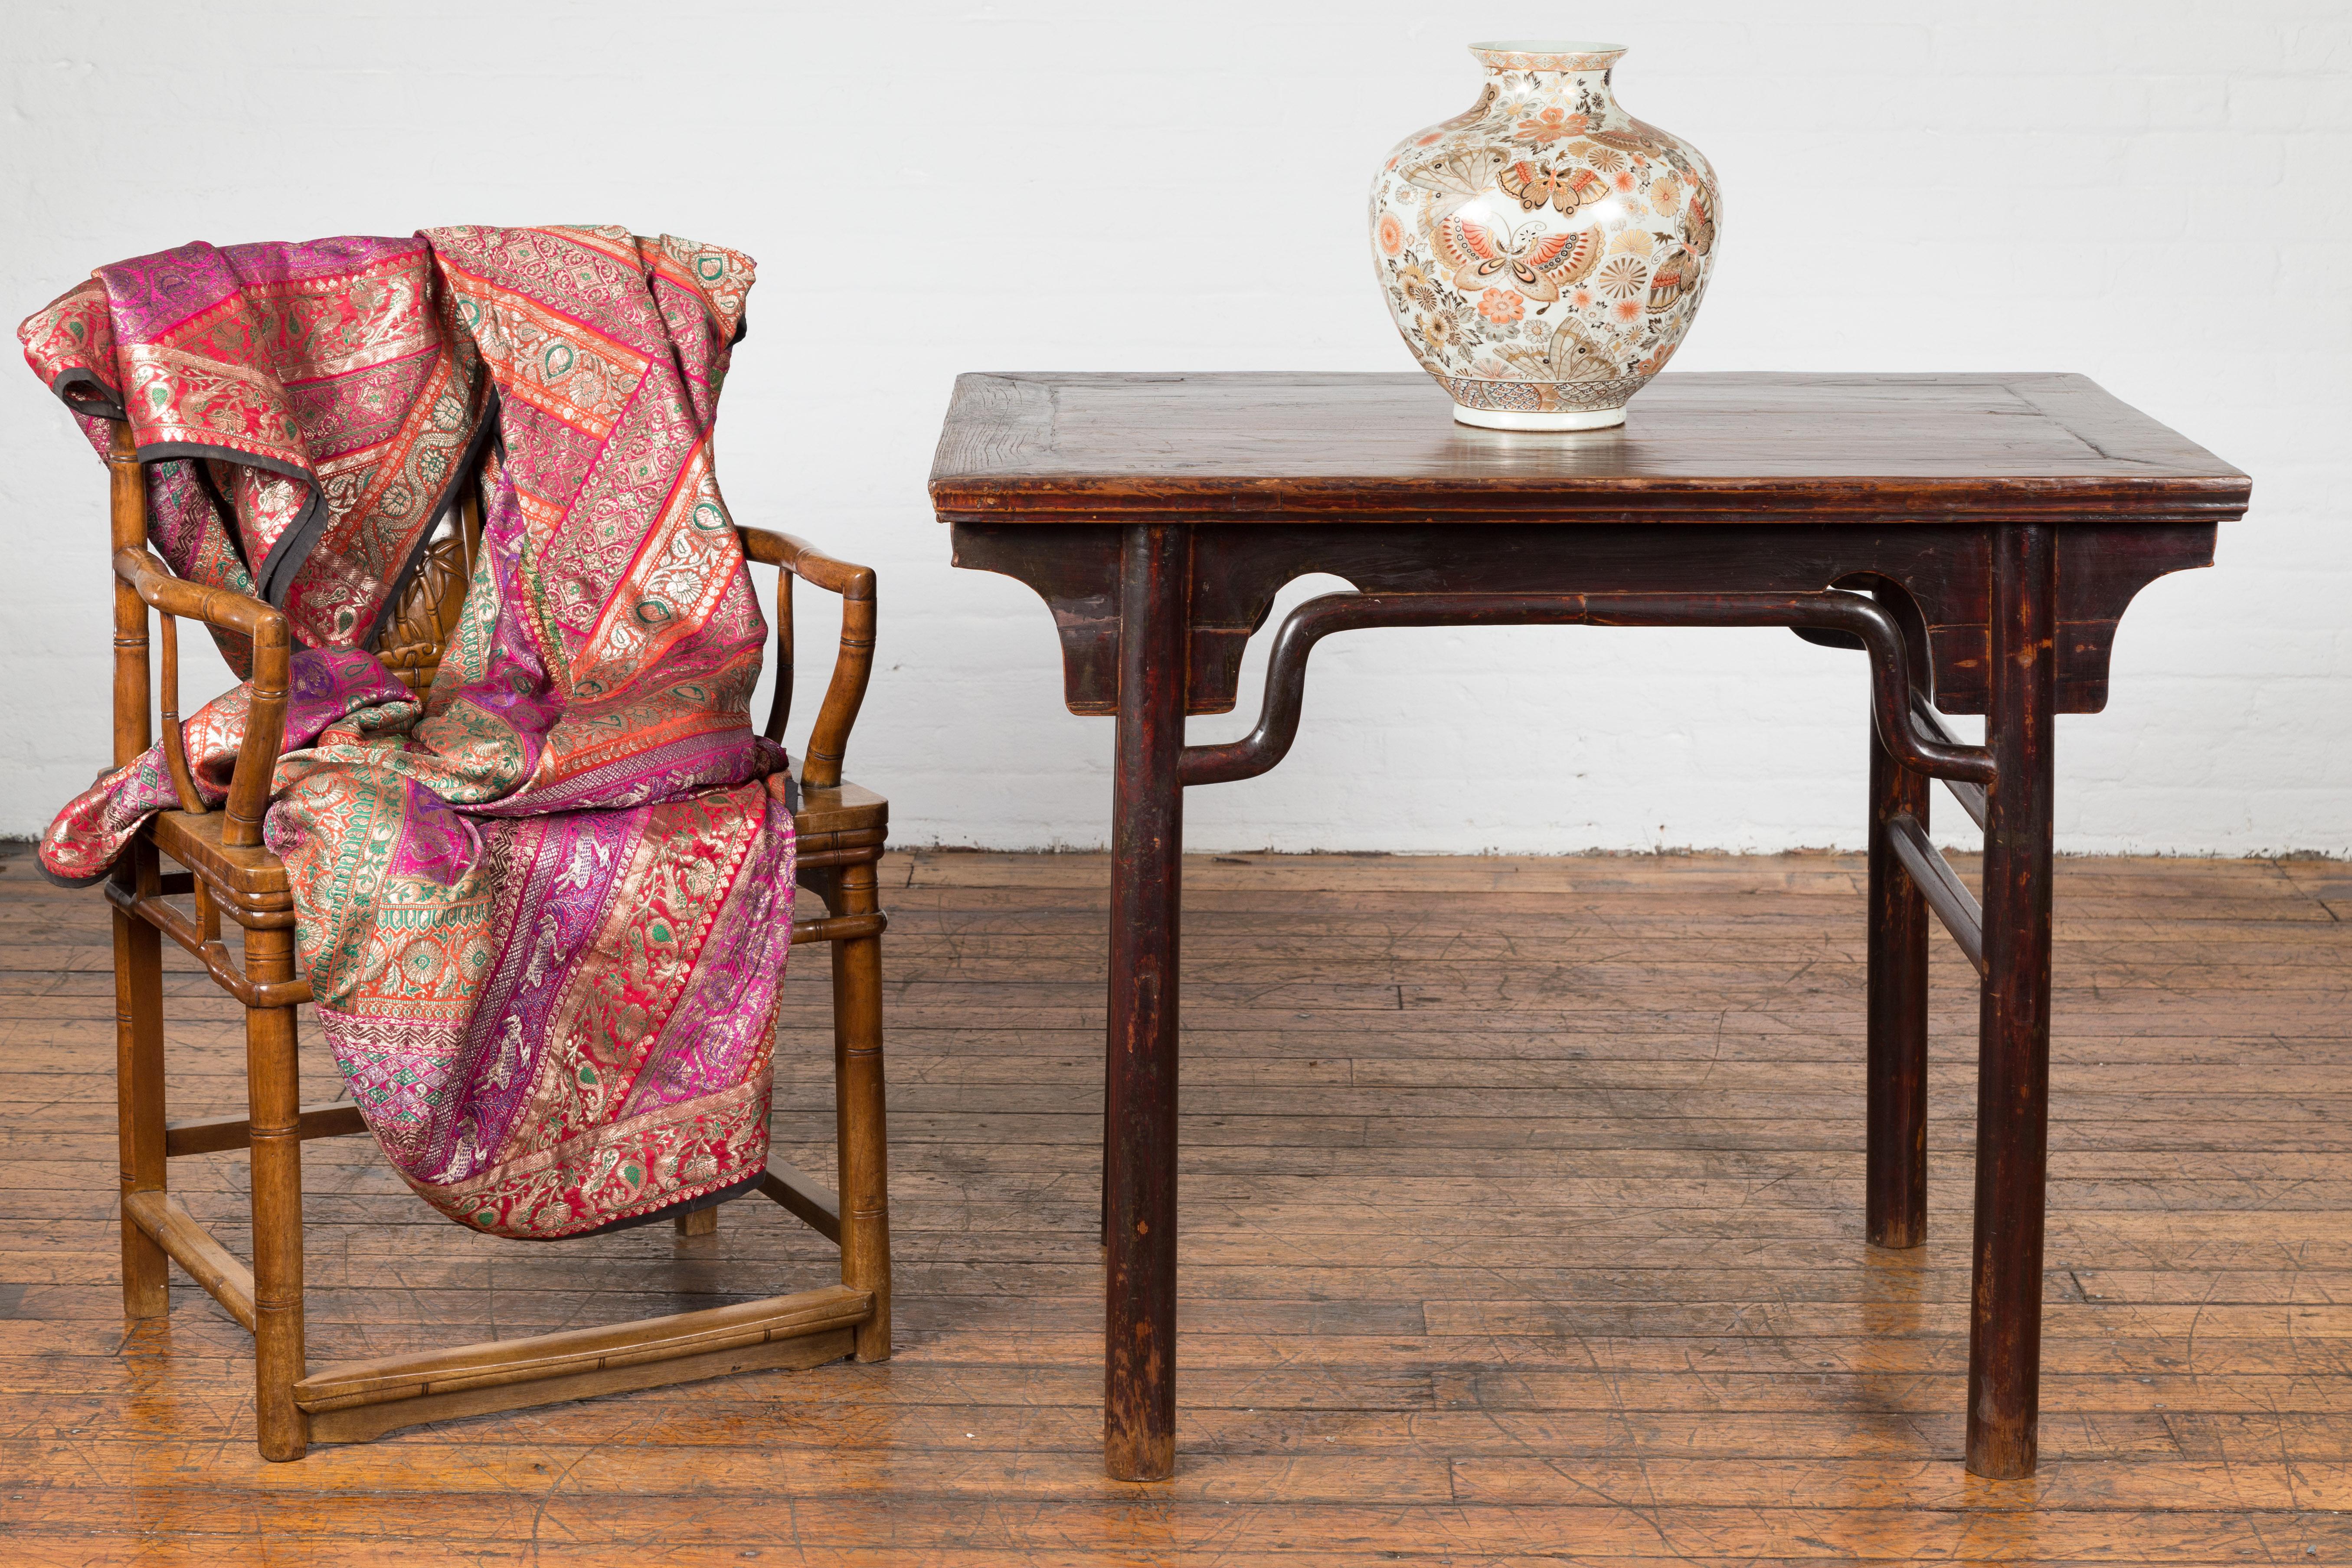 Chinese 19th Century Qing Dynasty Altar Console Table with Distressed Lacquer In Good Condition For Sale In Yonkers, NY